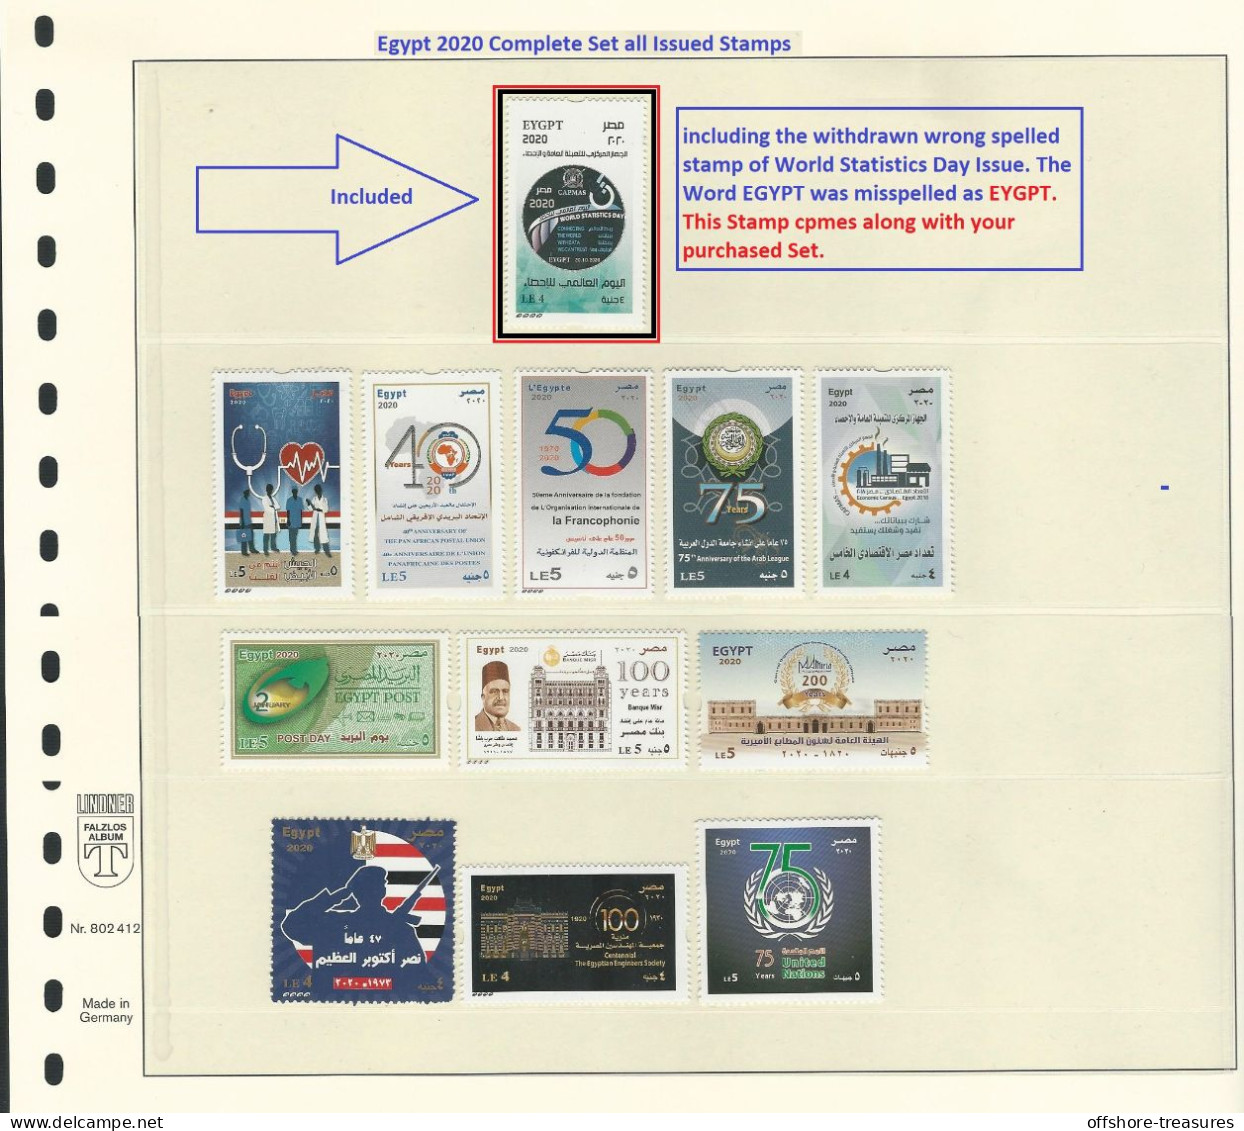 Egypt EGYPTE 2020 ONE YEAR Full Set Stamps ALL Commemorative Issued INCL Error World Statistics Day Stamp - Nuevos